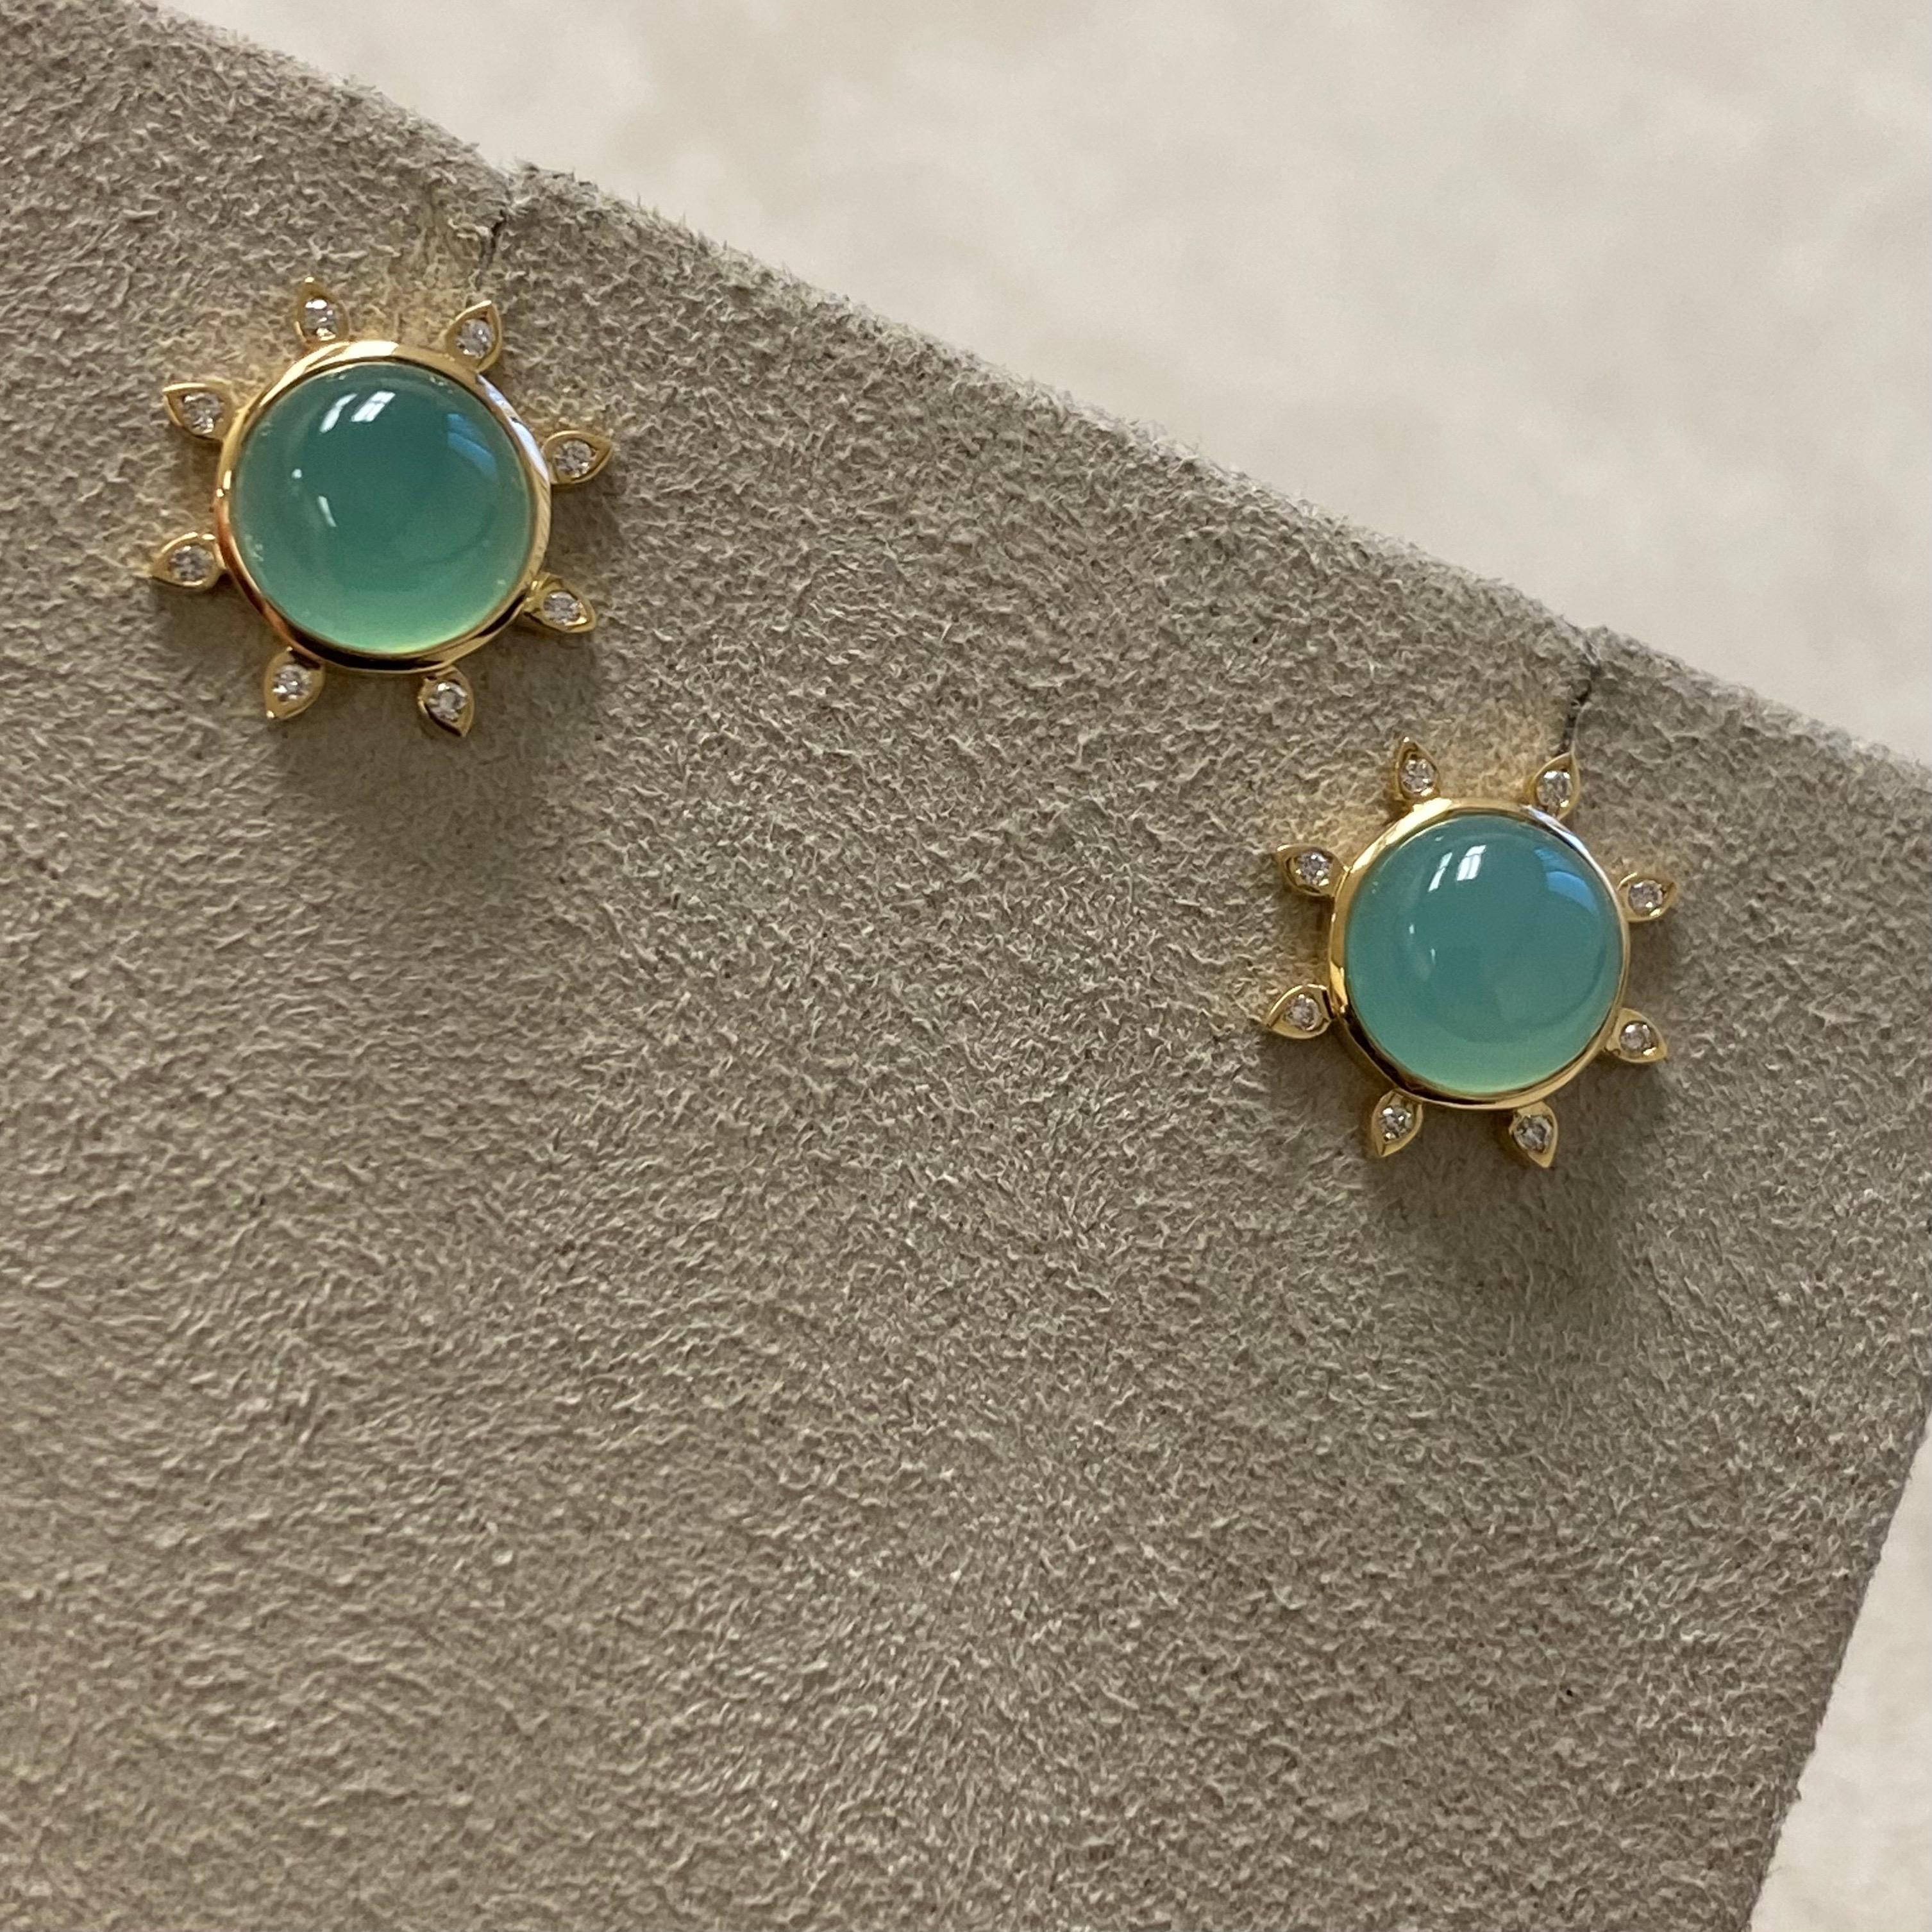 Created in 18 karat yellow gold
Light Green Chalcedony cabochons 4 carats approx.
Diamonds 0.10 carat approx.
18kyg butterfly backs
Limited edition

Hand-crafted in 18 karat yellow gold, these limited edition earrings feature 4 carats of glistening